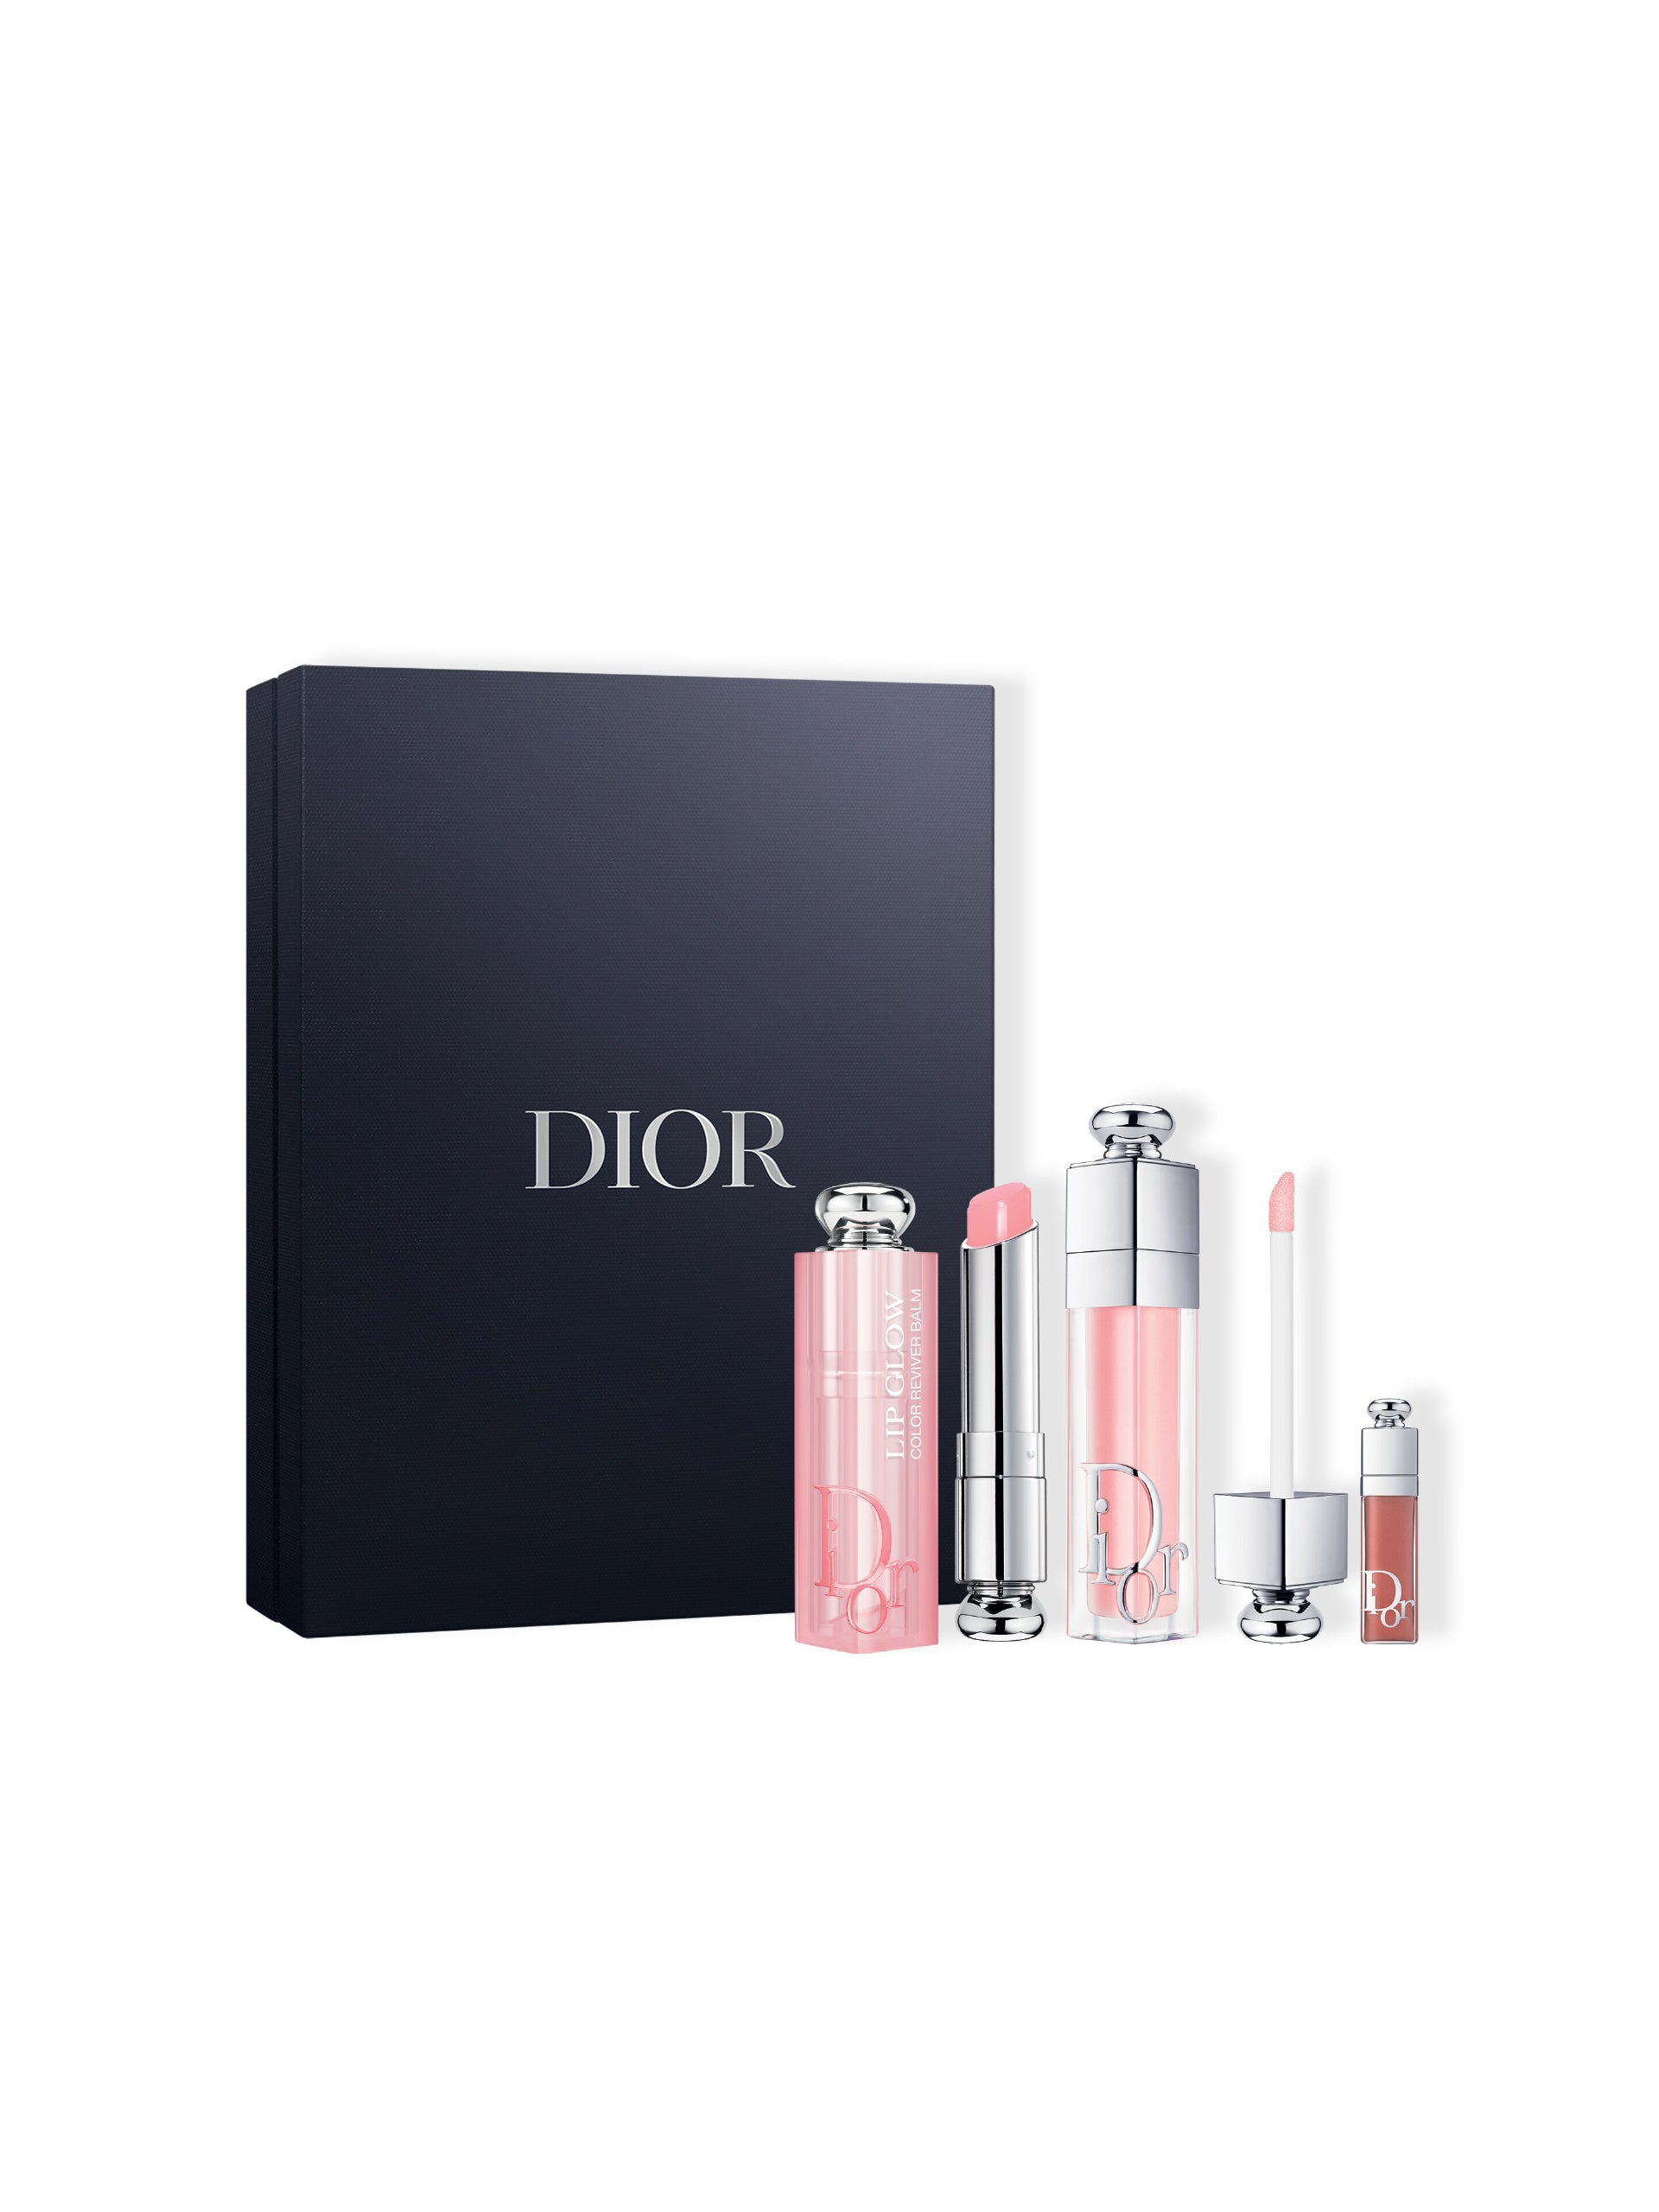 001 - Makeup products balm Set Plumping gloss Addict Product and Dior Pink ae 3 – lip